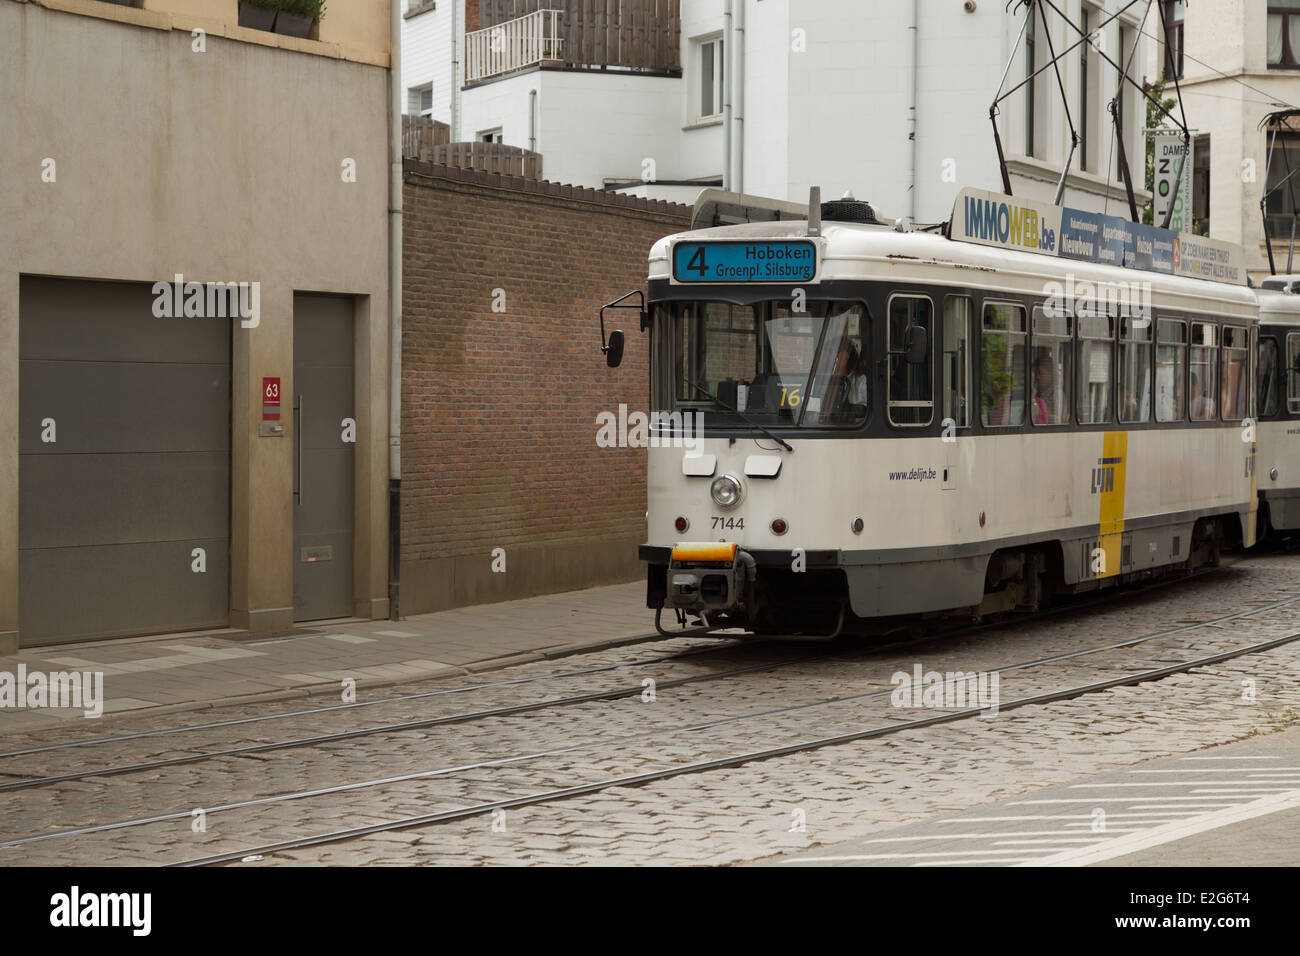 A photograph of a tram in Antwerp, Belgium. Antwerp is the second most populous city in Belgium. Stock Photo